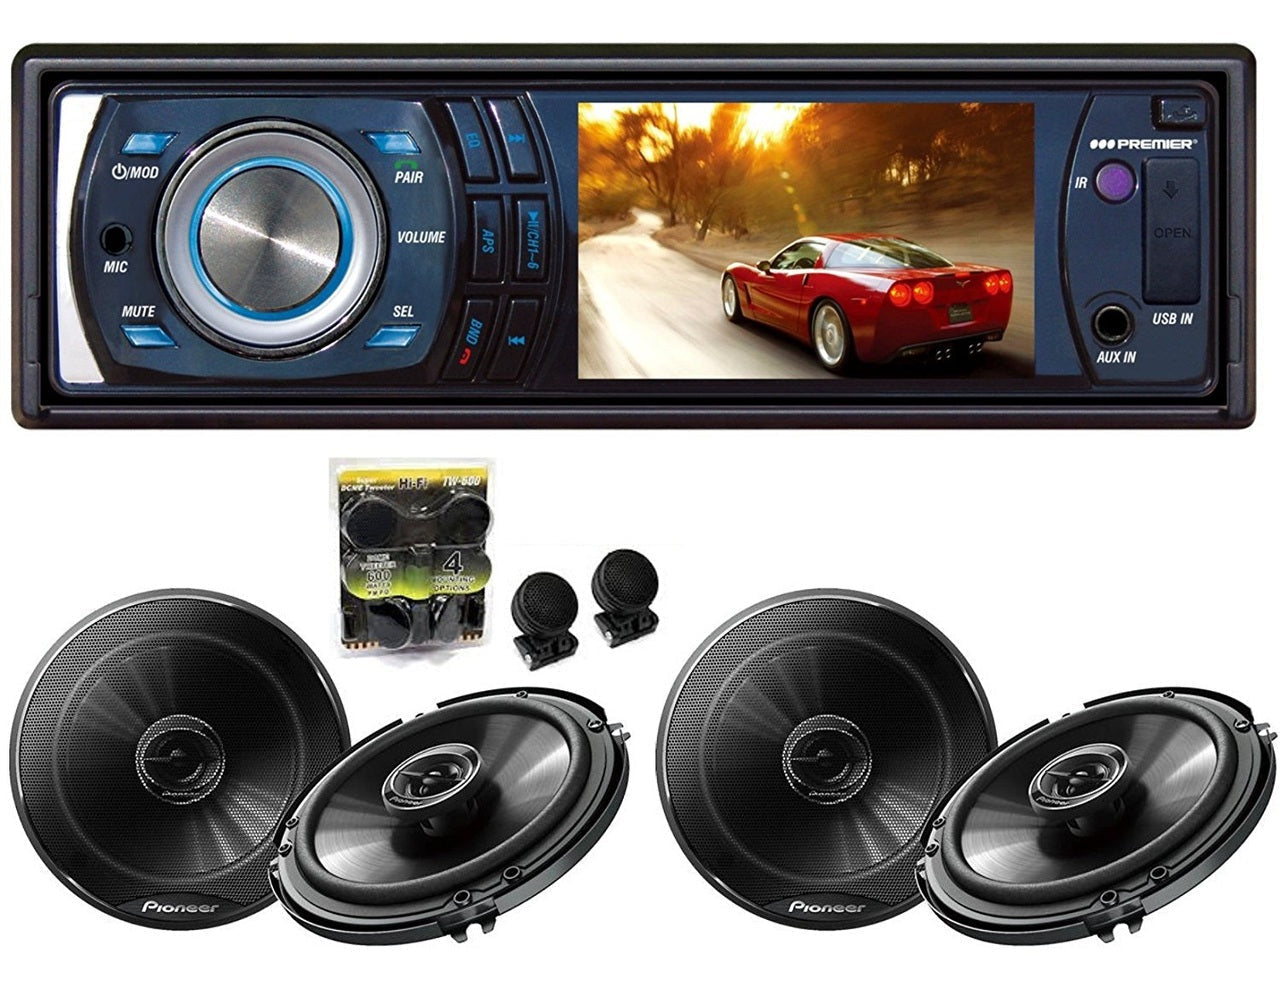 Absolute DMR-380BTAD TS-G1645R TW600<br/> 3.5-Inch In-Dash Single Din Receiver With 2 Pairs Of Pioneer TS-G1645R 6.5 Speakers And Free Absolute TW600 Tweeter